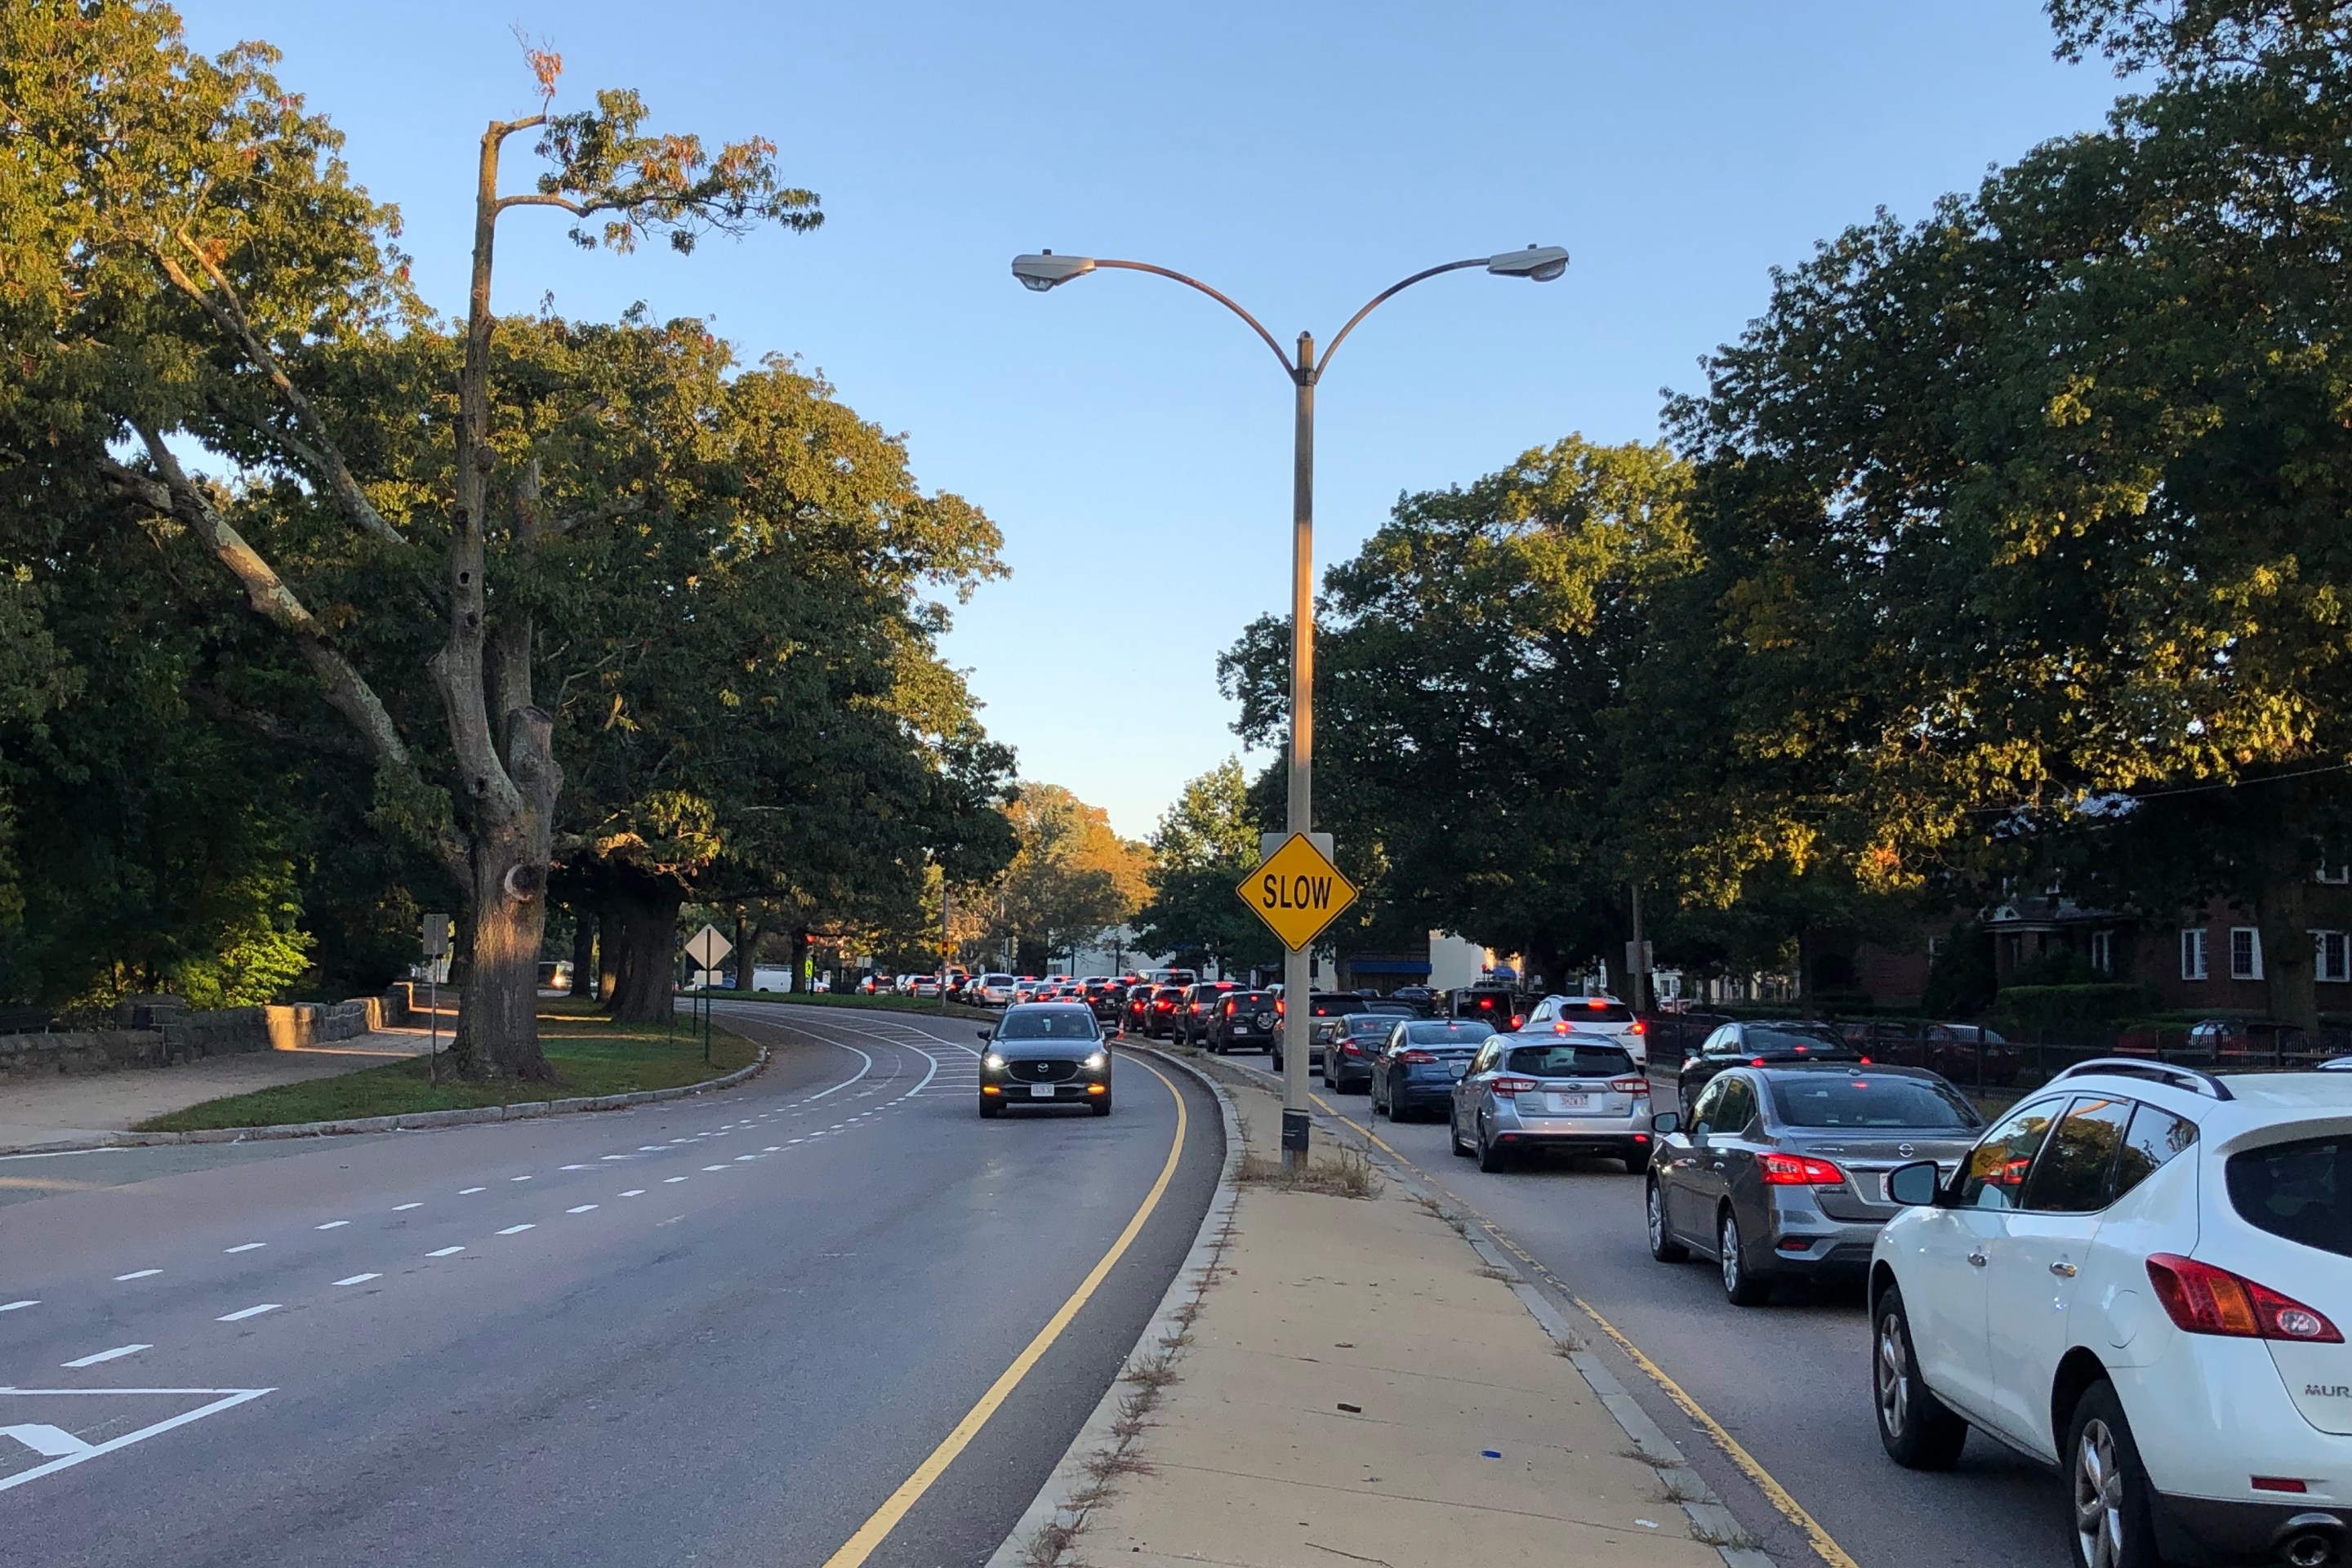 A long line of cars waits in two lanes of stopped traffic on the right, while on the left, a single car drives down a roadway next to a wide bike lane. A concrete median divides the two sides of the road, and on the edges of the photo are large, mature leafy trees.